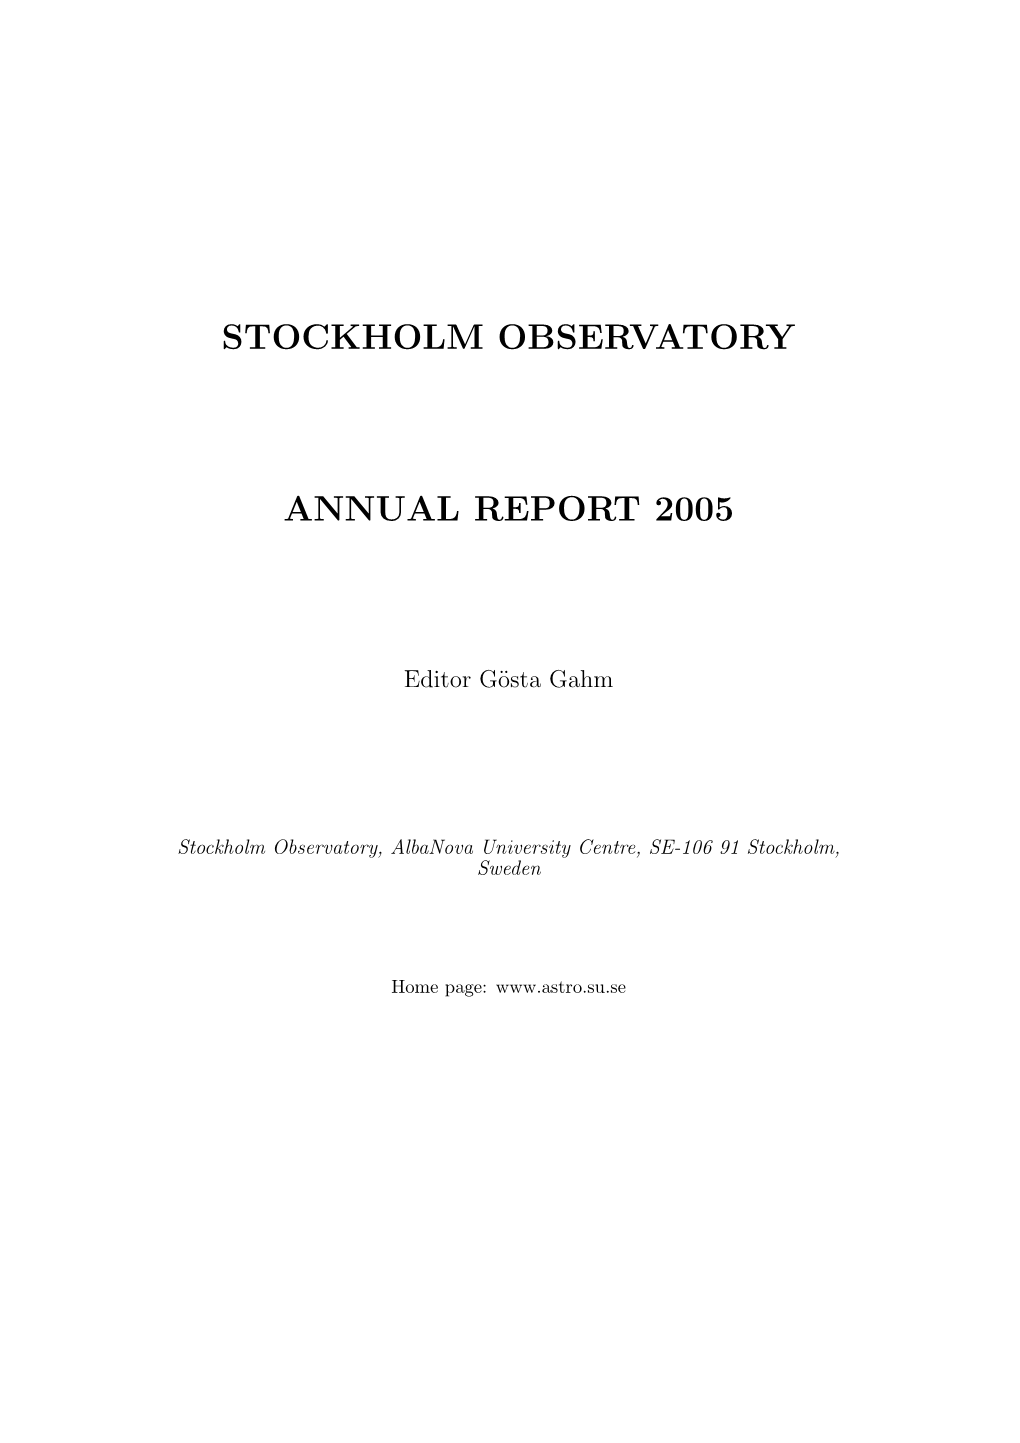 Stockholm Observatory Annual Report 2005